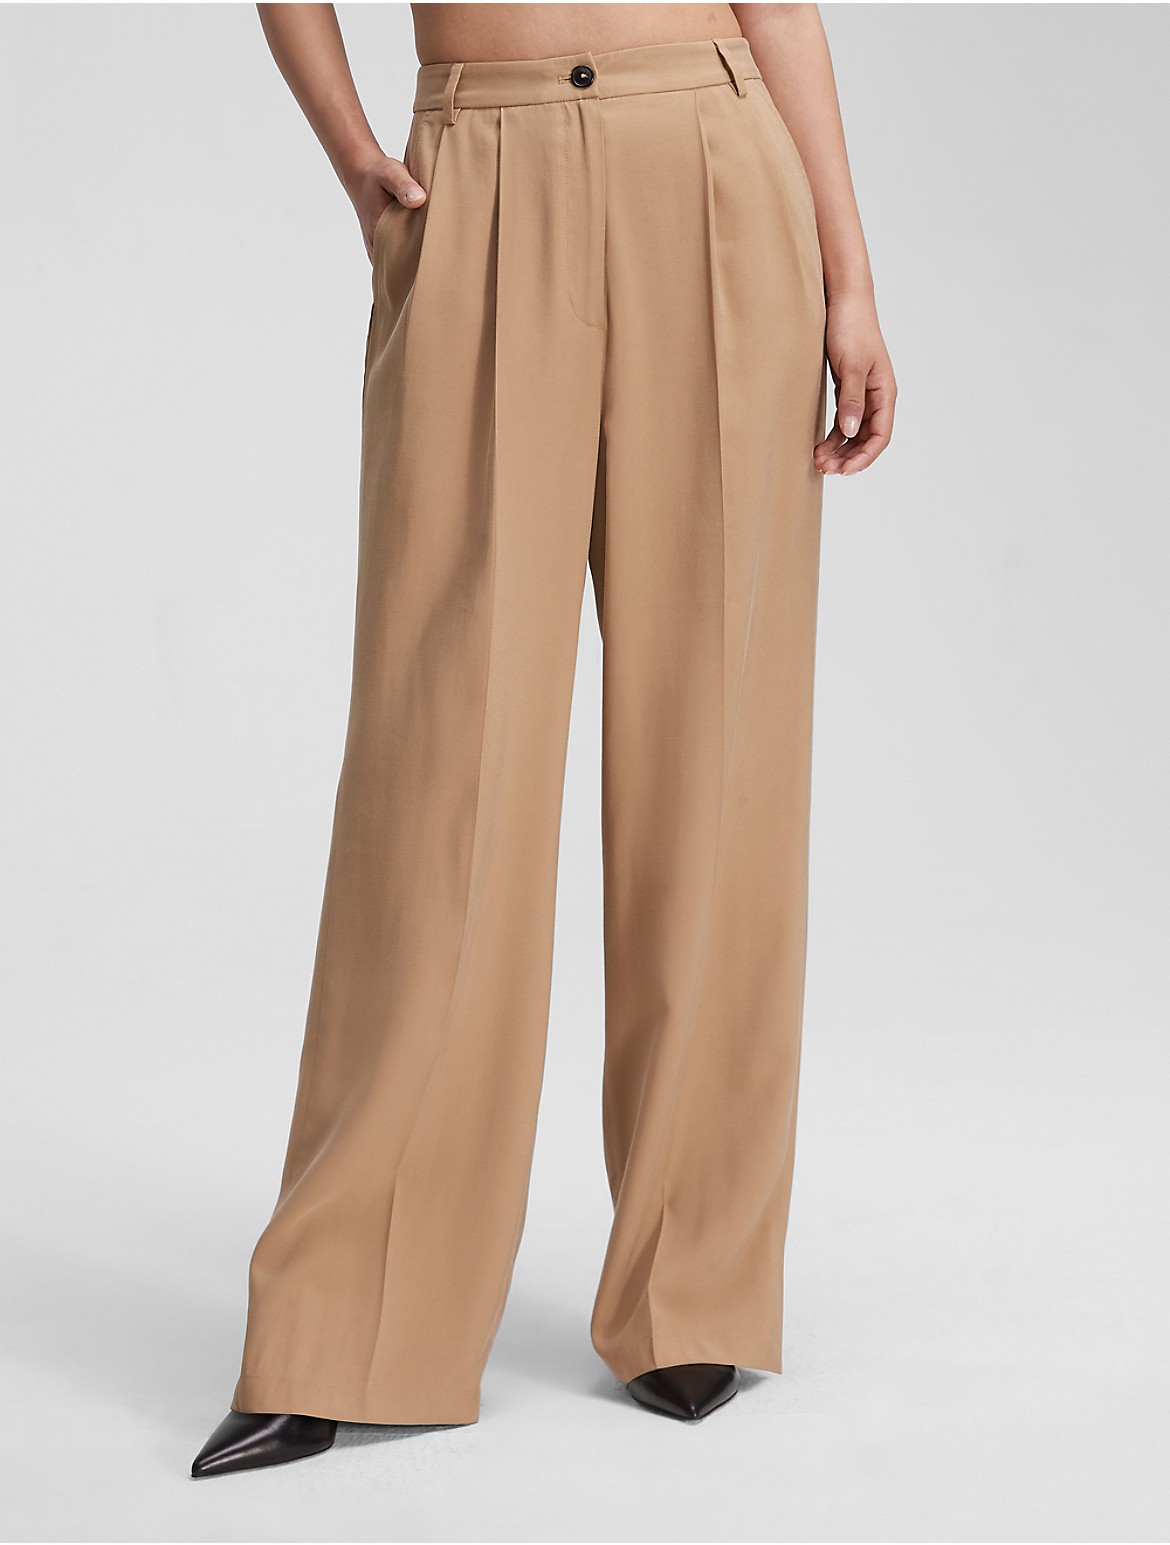 Calvin Klein Women's Soft Twill Relaxed Pant - Brown - 25